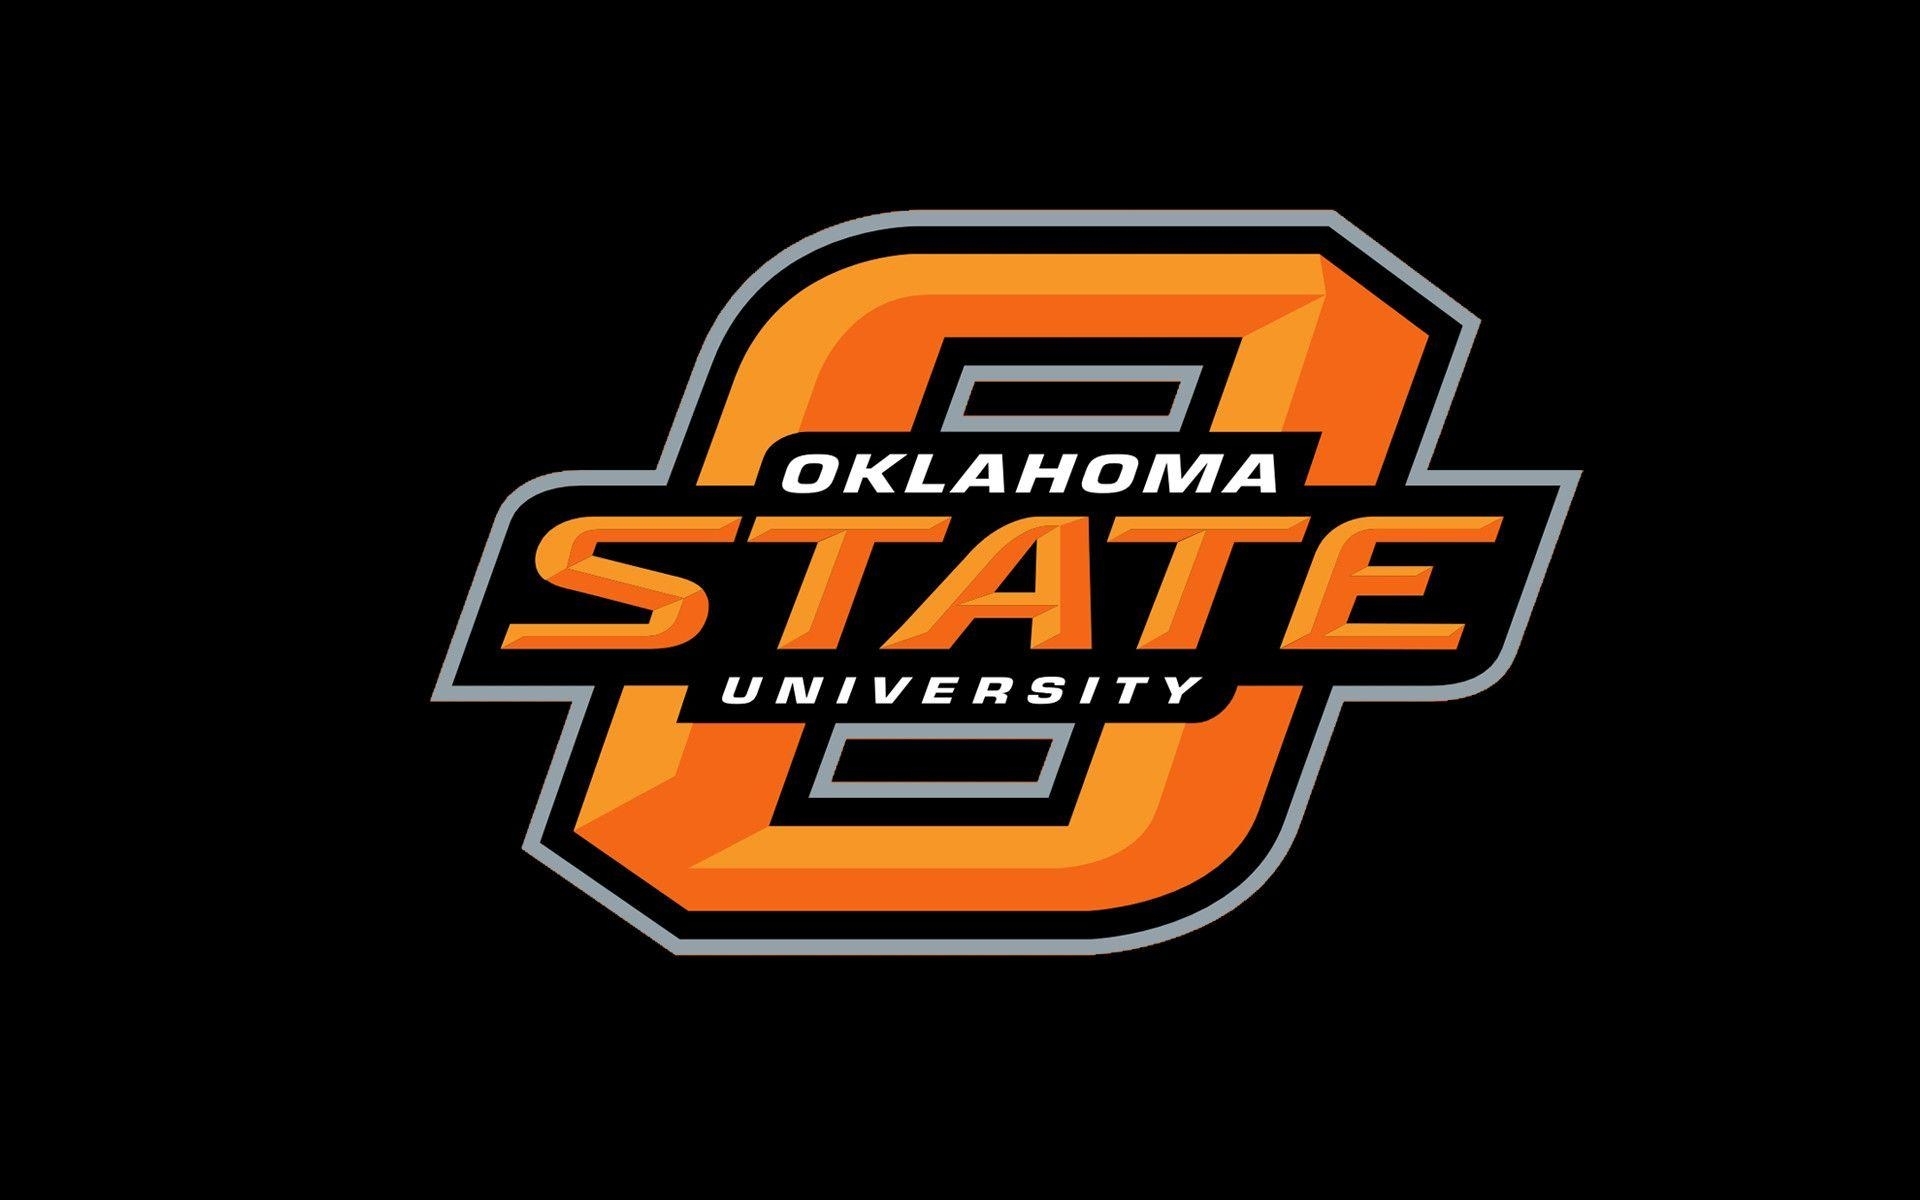 10 Top Oklahoma State University Wallpaper FULL HD 1920×1080 For PC Background